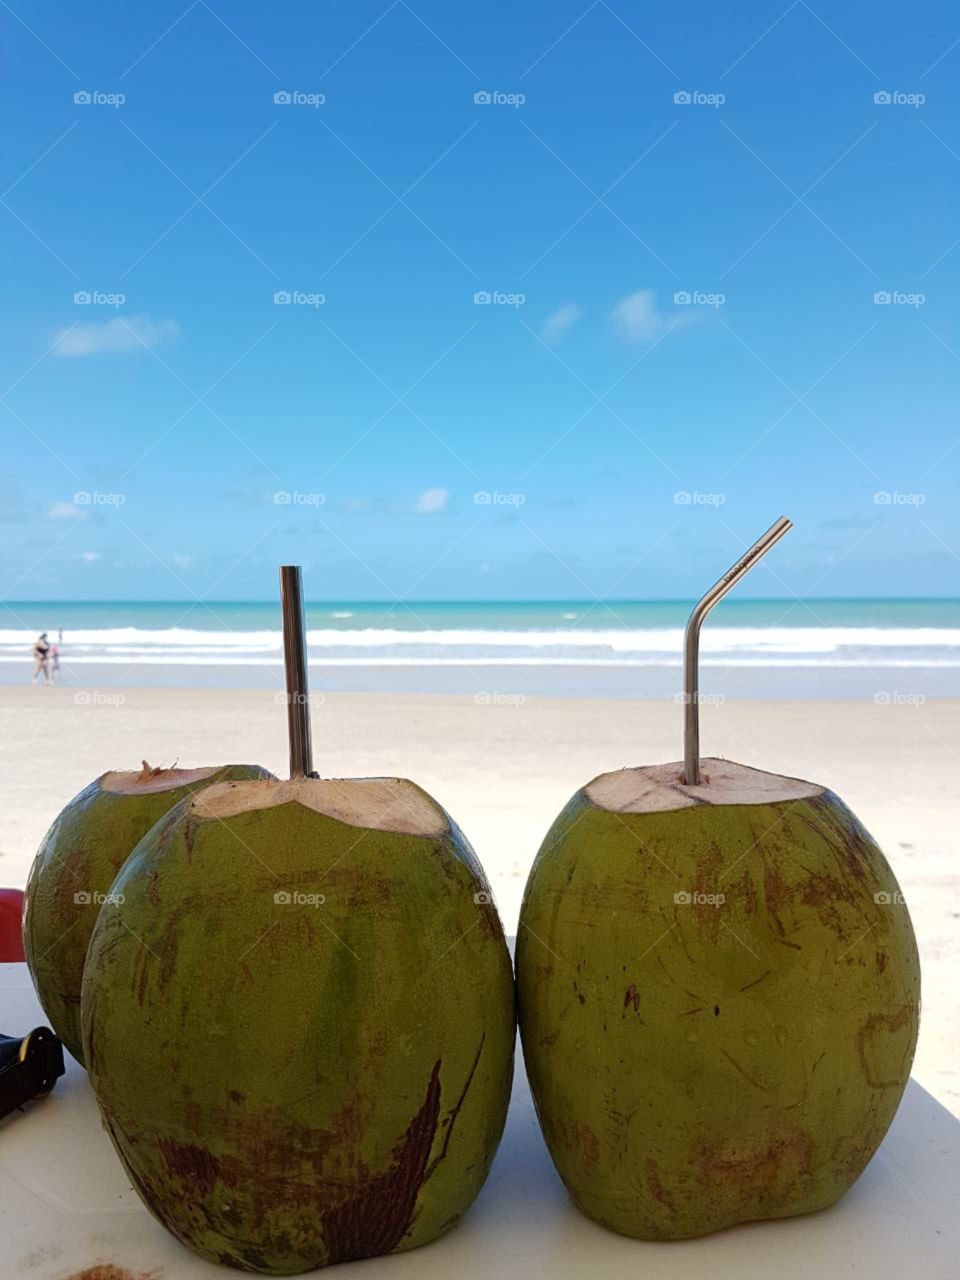 A coconut, a reusable straw, the sea and nothing else.